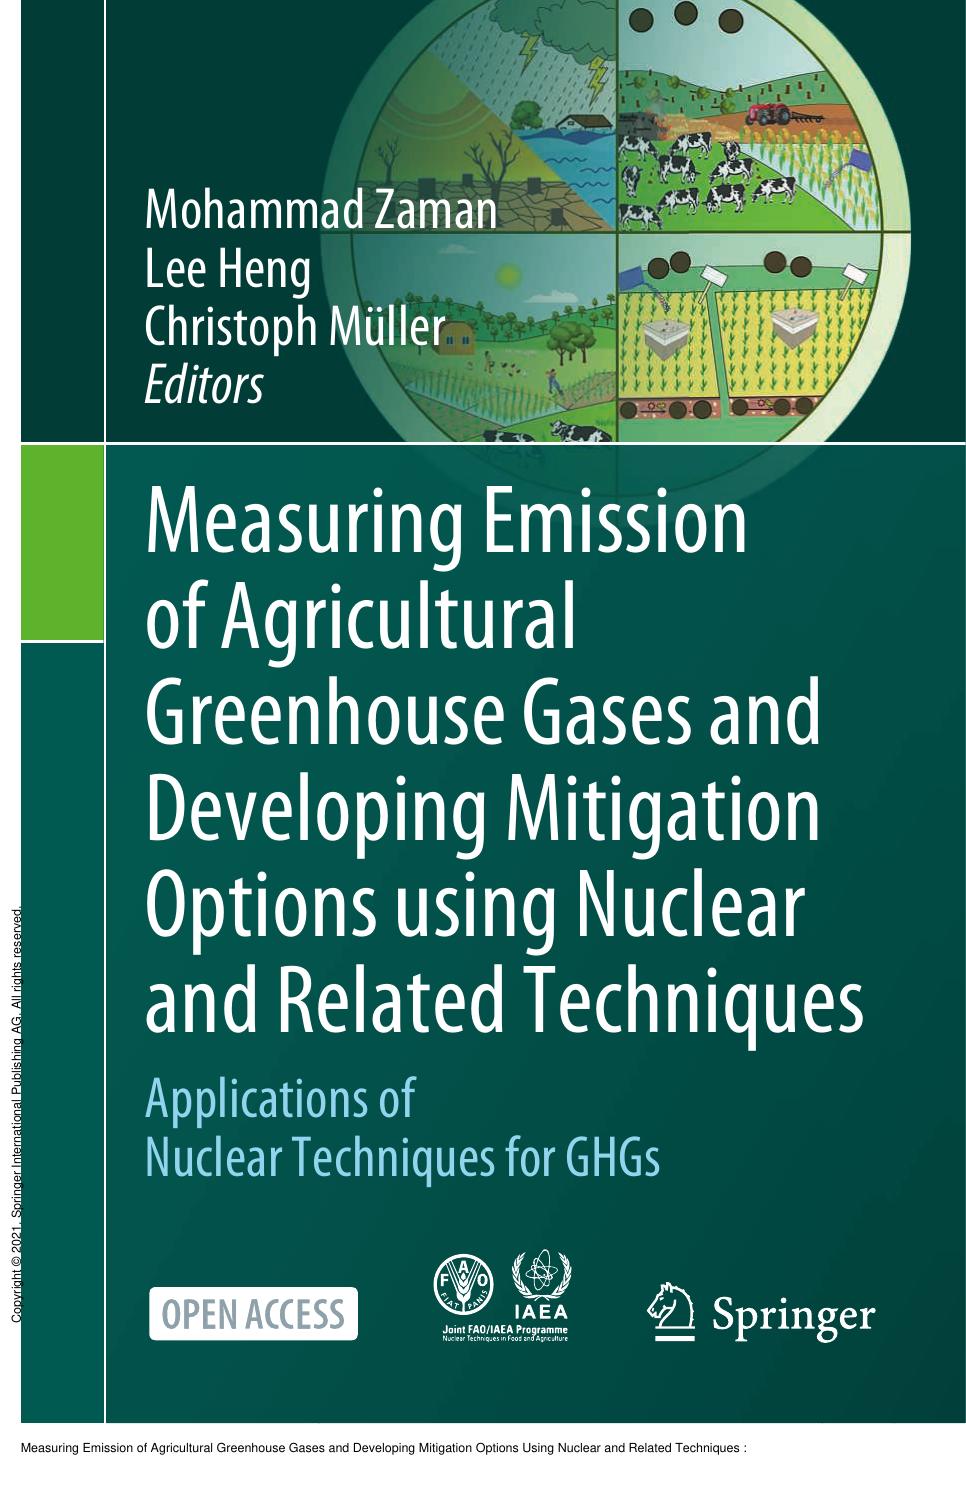 Measuring Emission of Agricultural Greenhouse Gases and Developing Mitigation Options Using Nuclear and Related Techniques : Applications of Nuclear Techniques for GHGs by Mohammad Zaman; Lee Heng; Christoph Müller